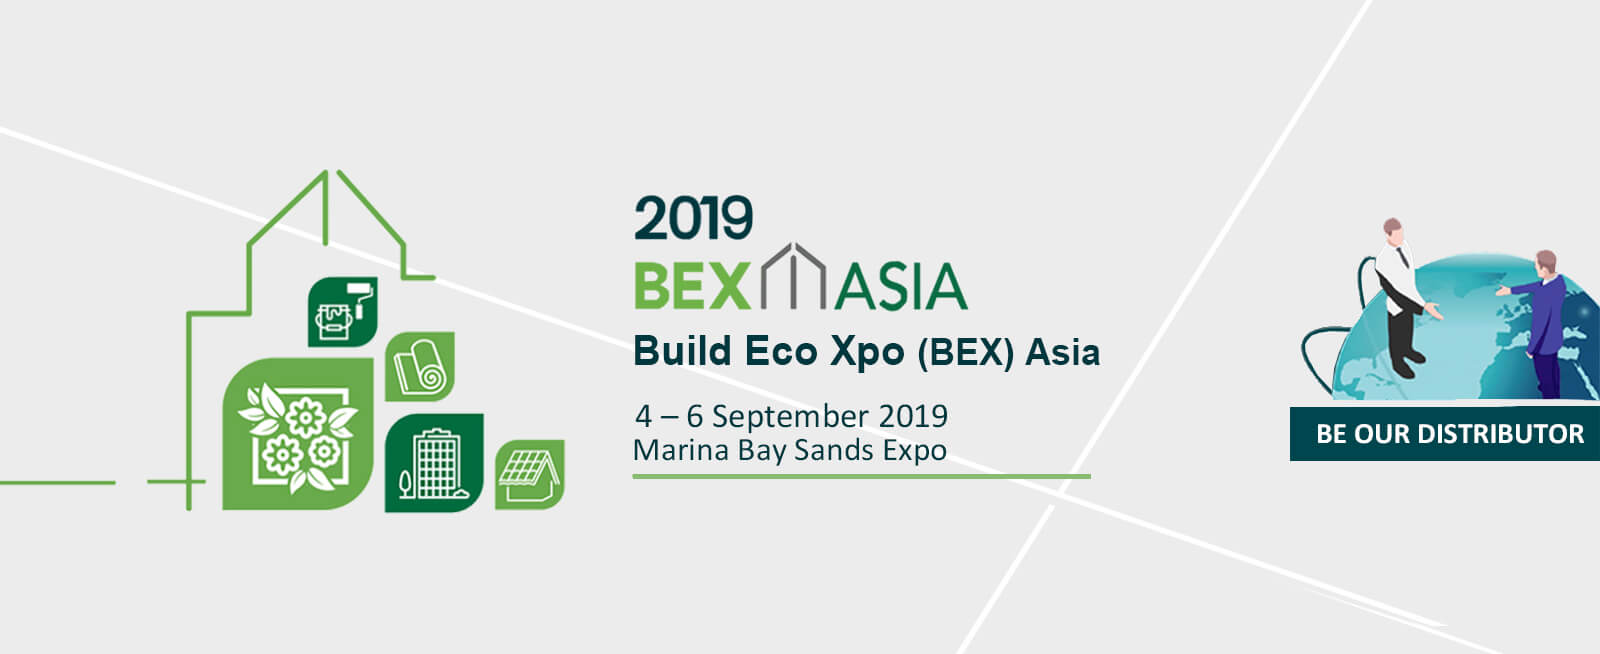 September 2019 Bex Asia Singapore Green & Quality Building Materials Exhibition